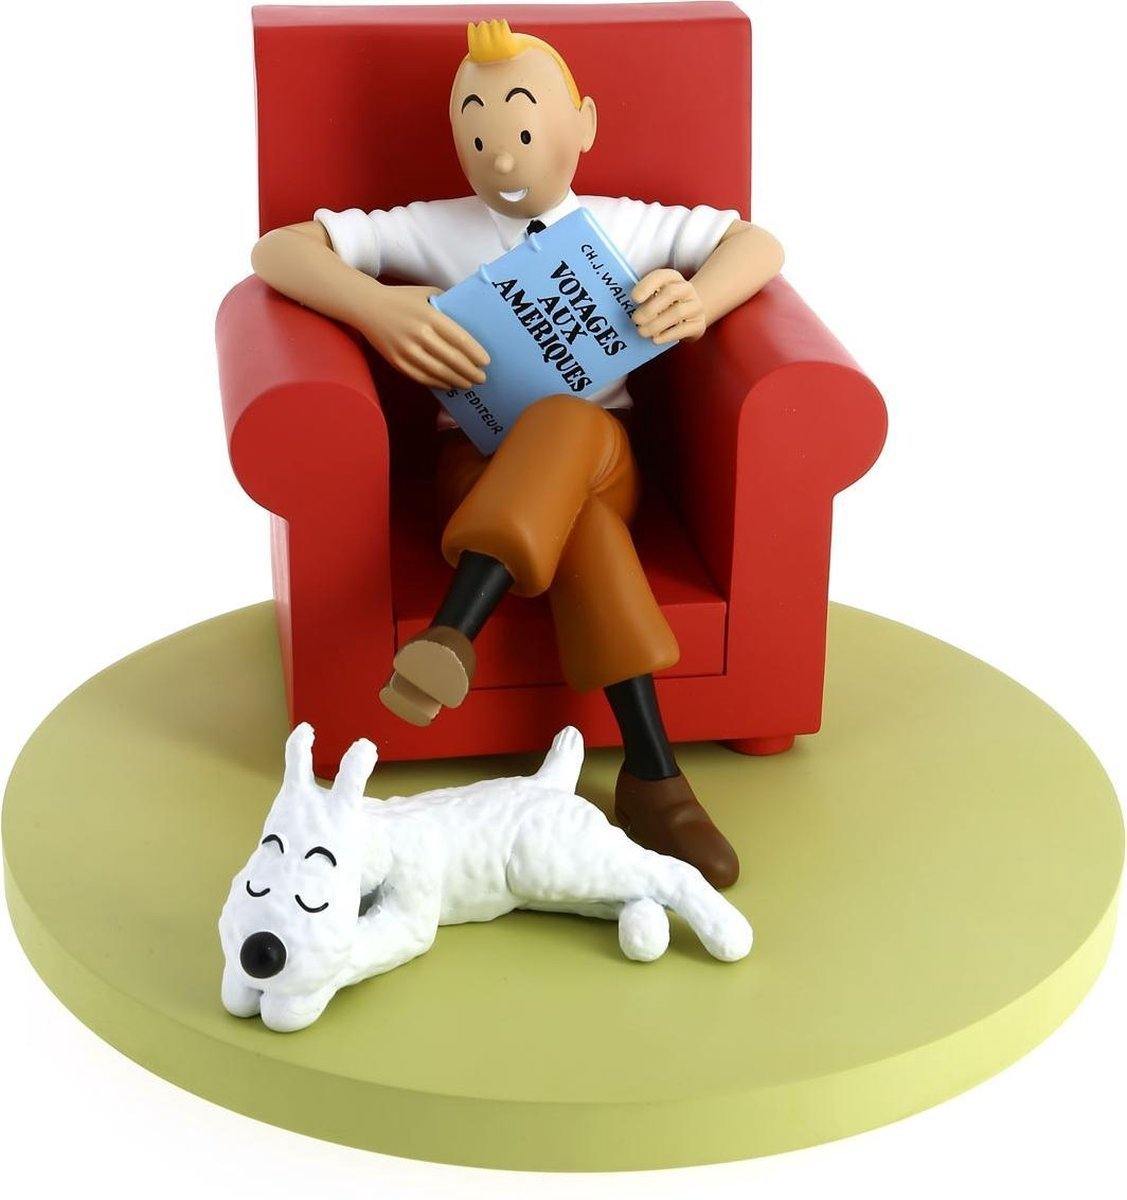 Tintin/Kuifje/Tim Moulinsart Tintin Model Moulinsart Resin Sofa Red Icons Collection (Moulinsart 46404) - chair, Chaise, Het gebroken oor, Kuifje, Moulinsart, red chair, stoel, The Broken Ear, Tintin - Gadgetz Home